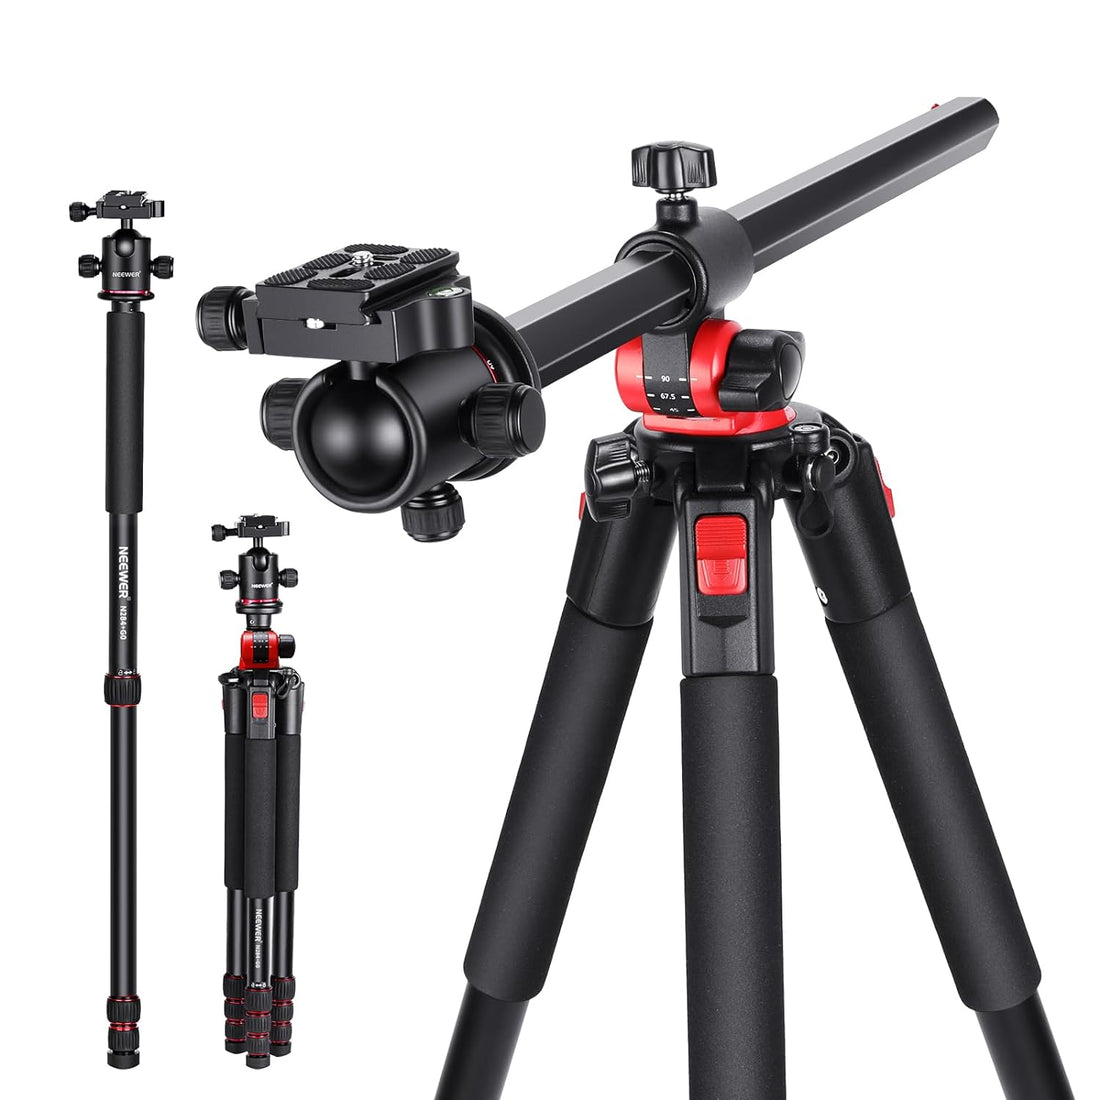 Neewer 72.4-Inch Aluminum Camera Tripod Monopod With 360-Degree Rotatable Center Column&Ball Head,Quick Shoe Plate,Bag For Dslr Camera,Video Camcorder,Travel&Work,Load Up To 33 Pounds,Black